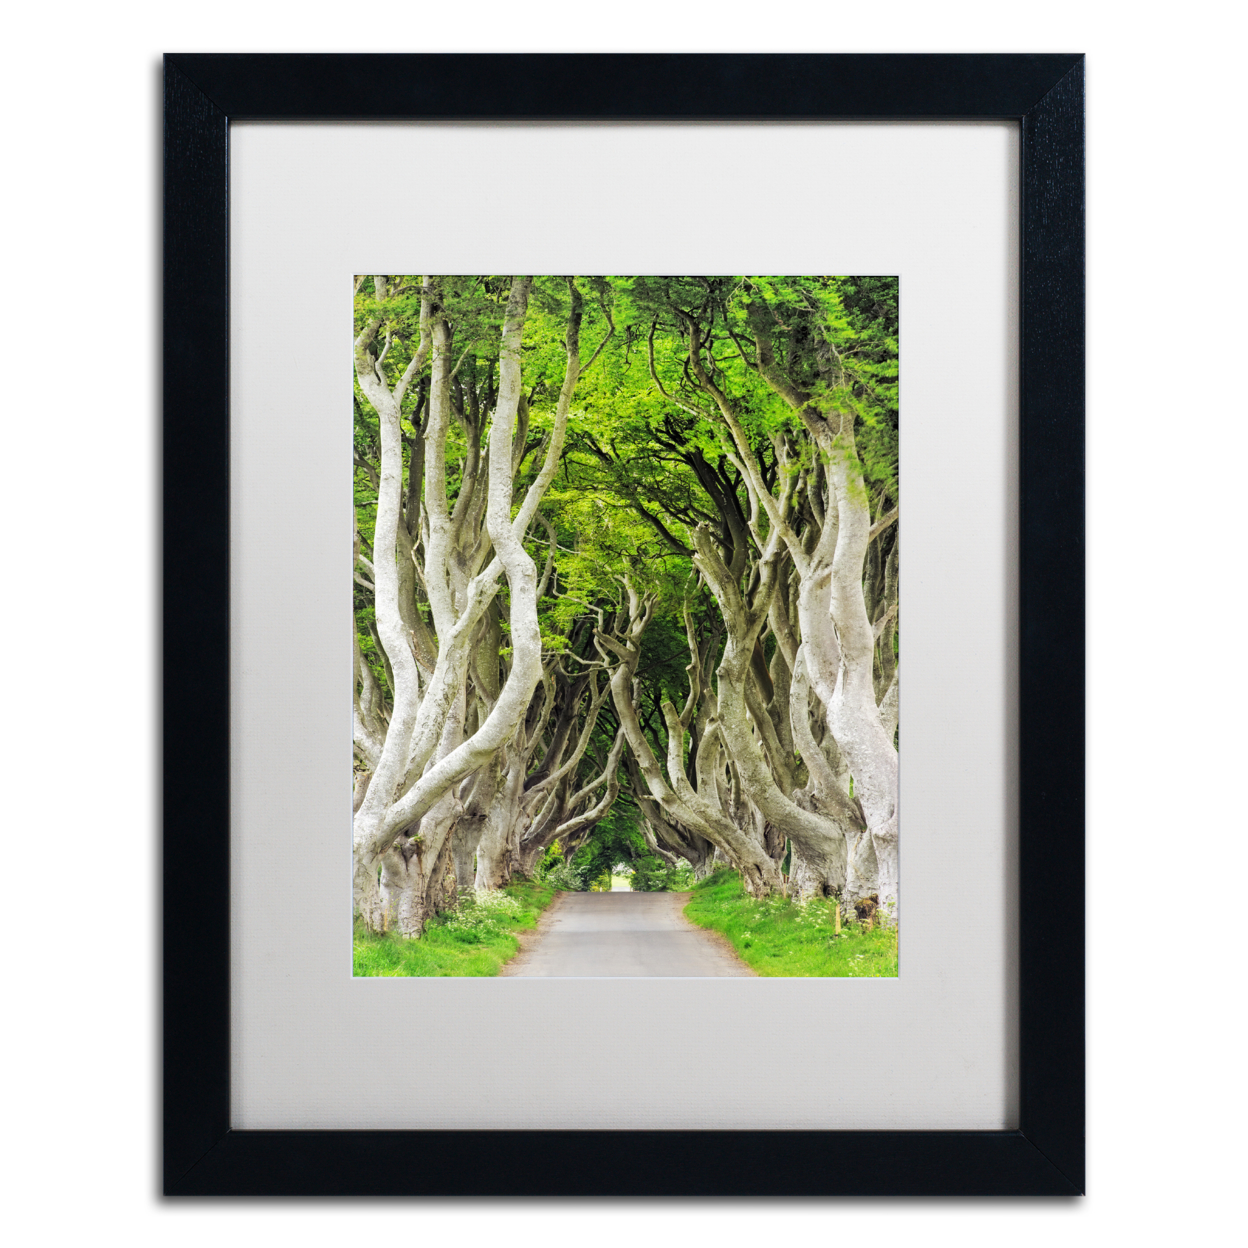 Philippe Sainte-Laudy 'The Dark Hedges' Black Wooden Framed Art 18 X 22 Inches